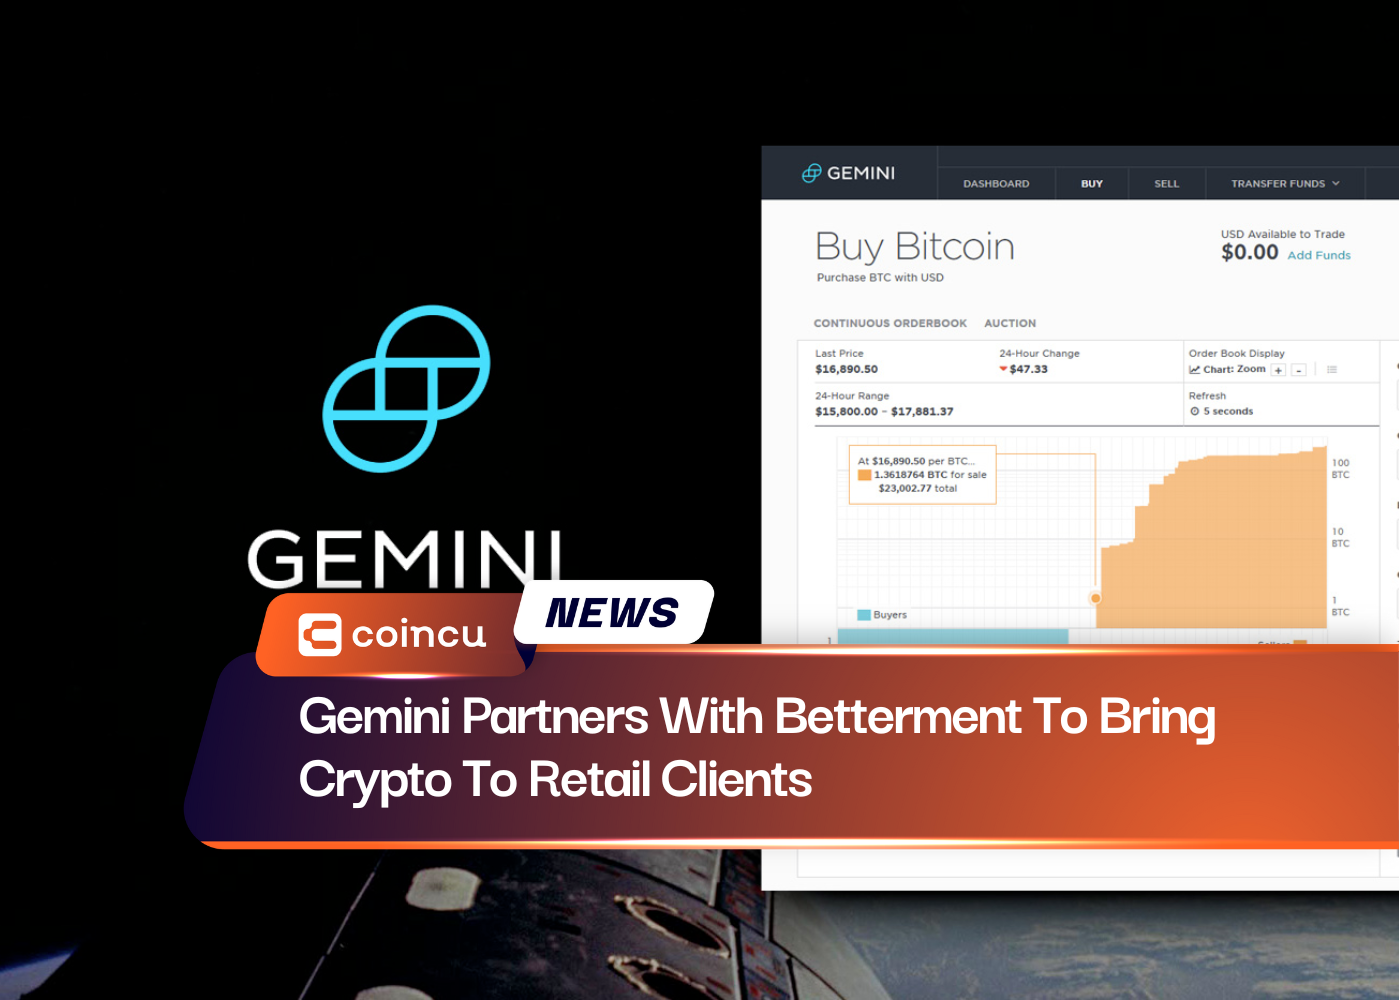 Gemini Partners With Betterment To Bring Crypto To Retail Clients